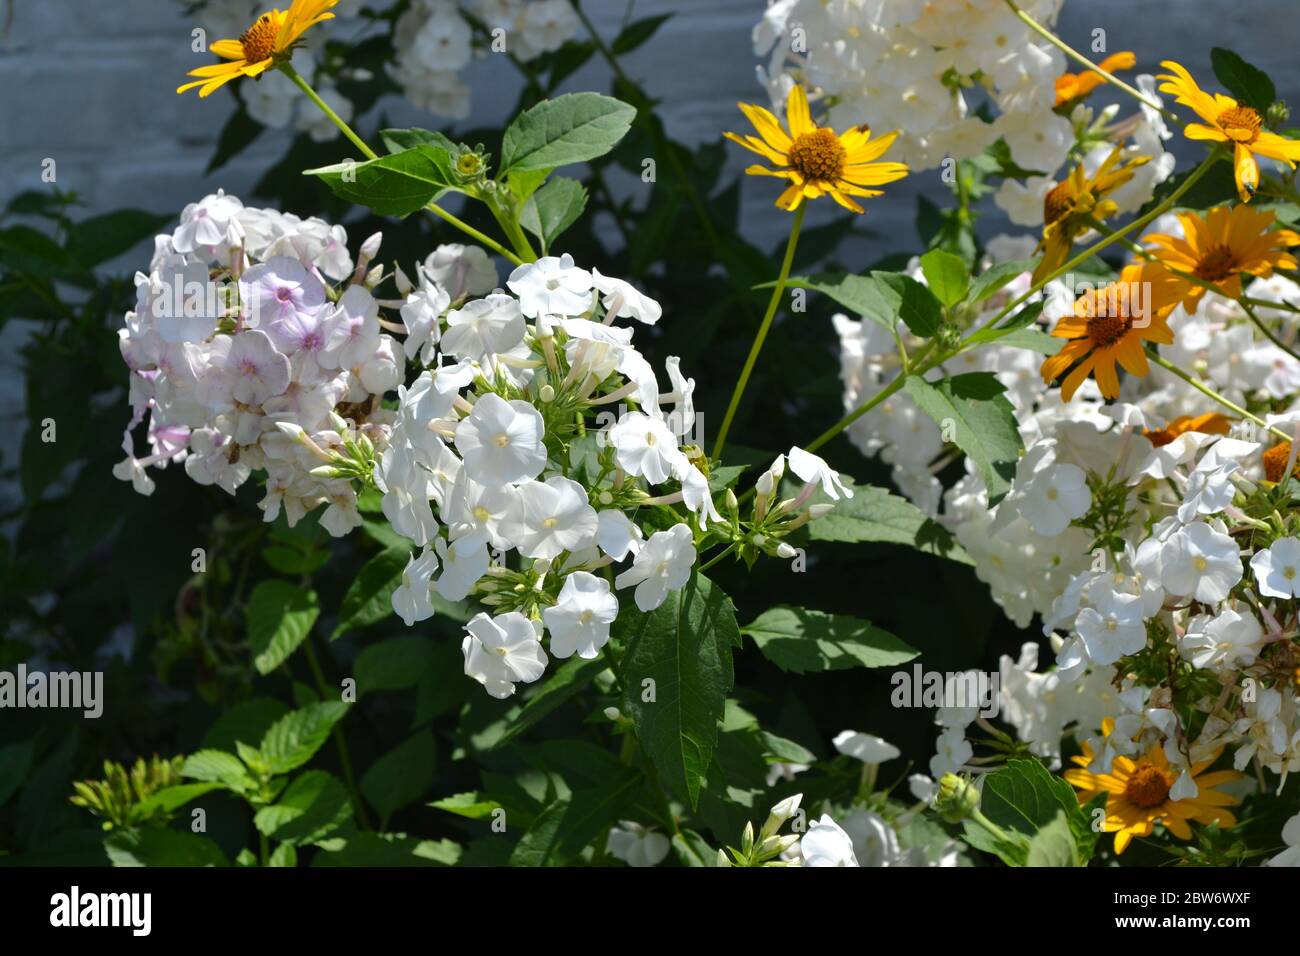 Gardening. Home. Beautiful inflorescences. Phlox flower. Perennial herbaceous plant. High branches. White flowers Stock Photo